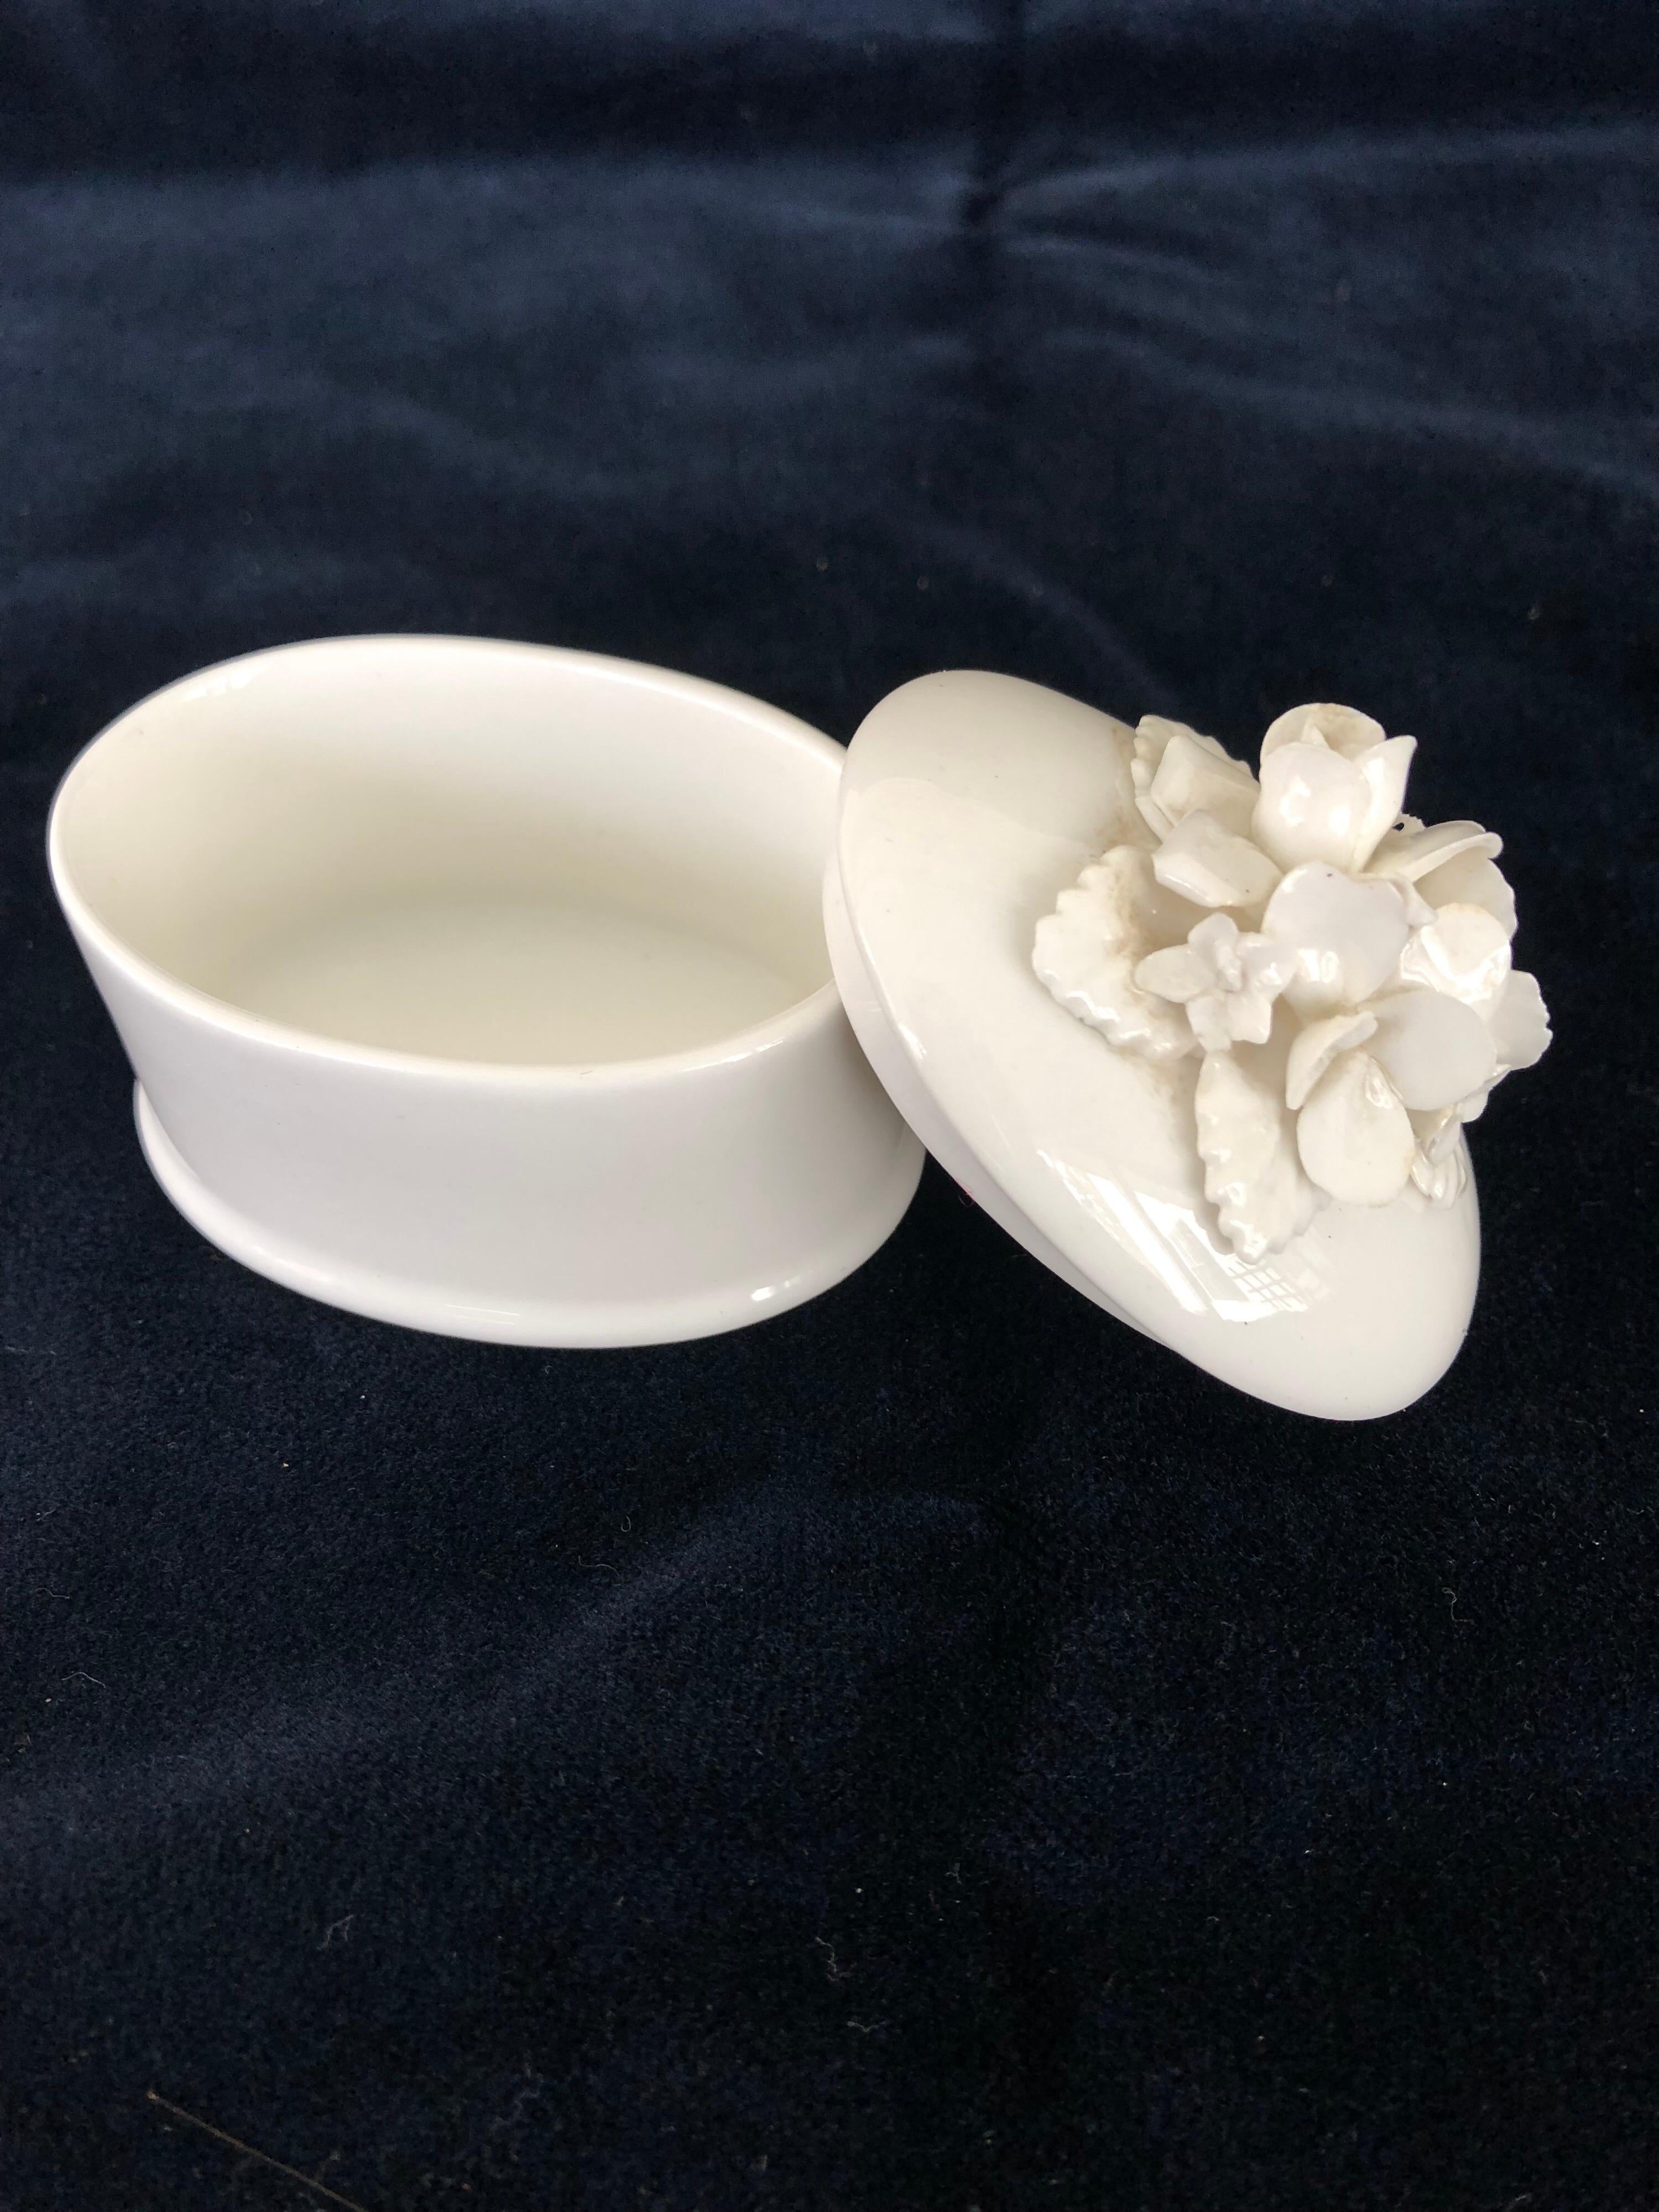 Staffordshire oval bone China pin box with raised porcelain flowers and leaves decorating the lid. Purchased 1960s Tiffany & Co.